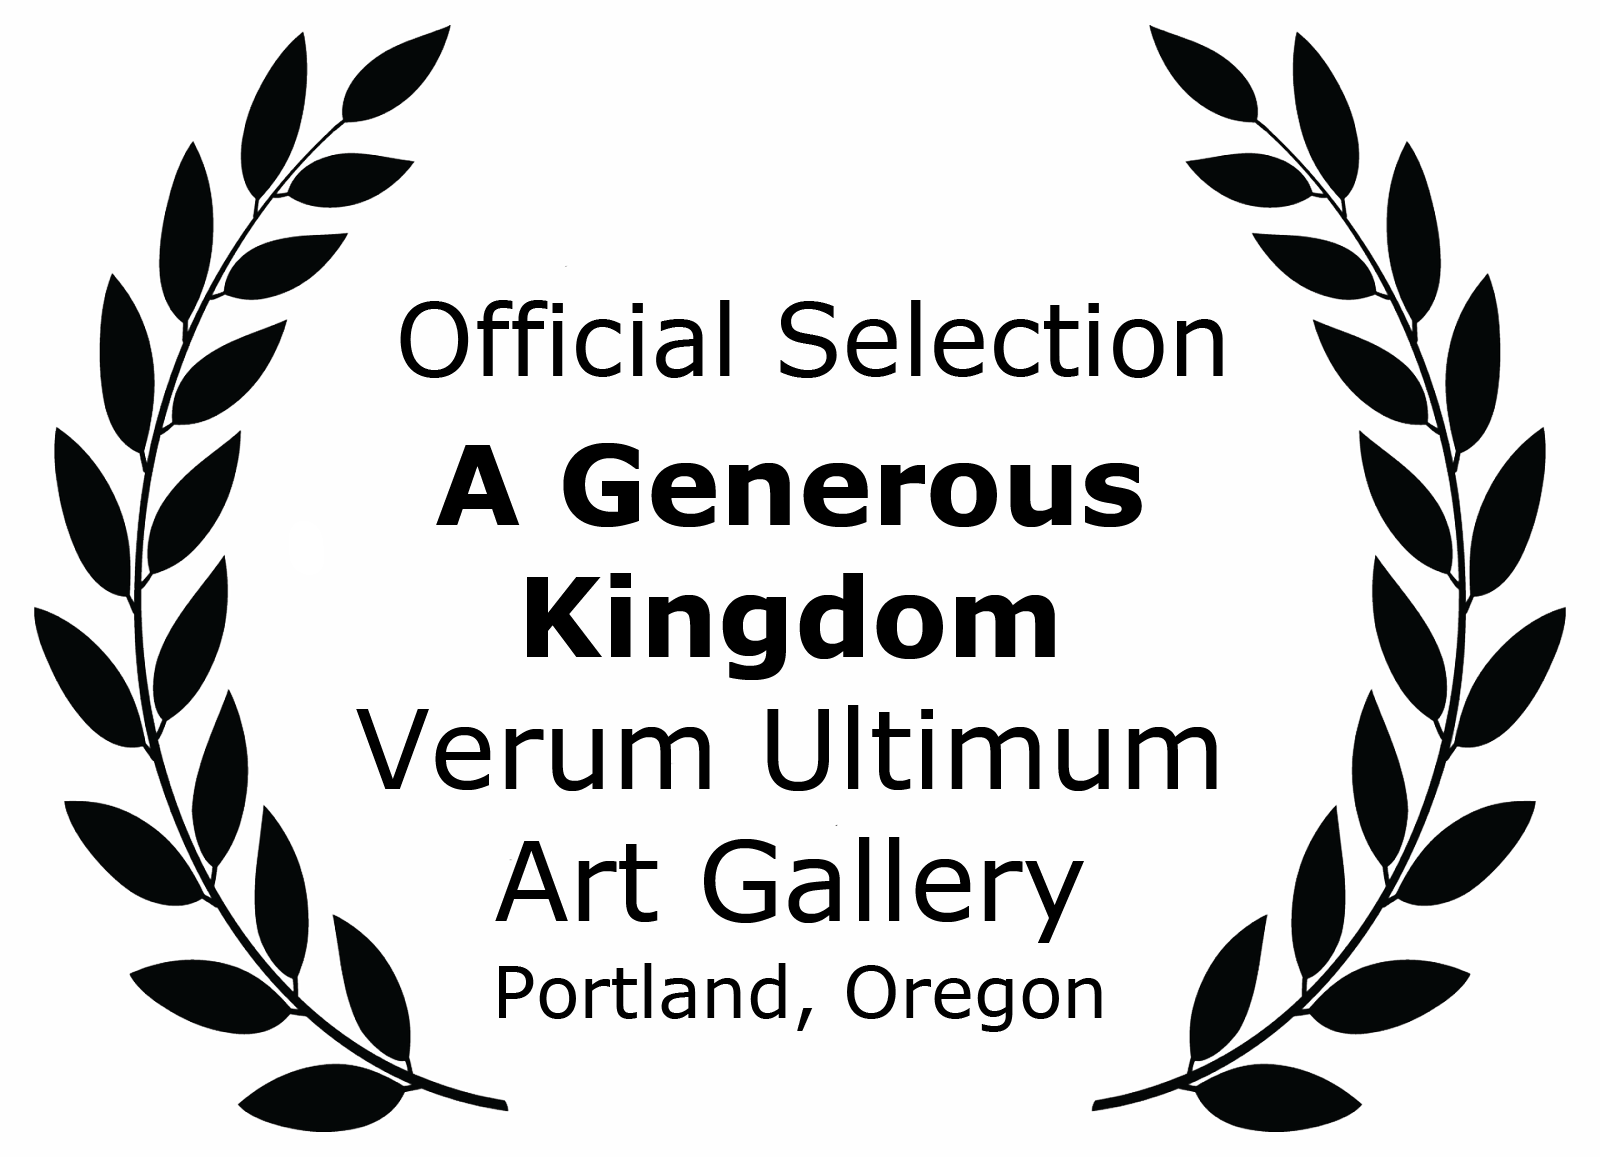 Official Selection A Genrous Kingdom Verum Ultimum Art Gallery